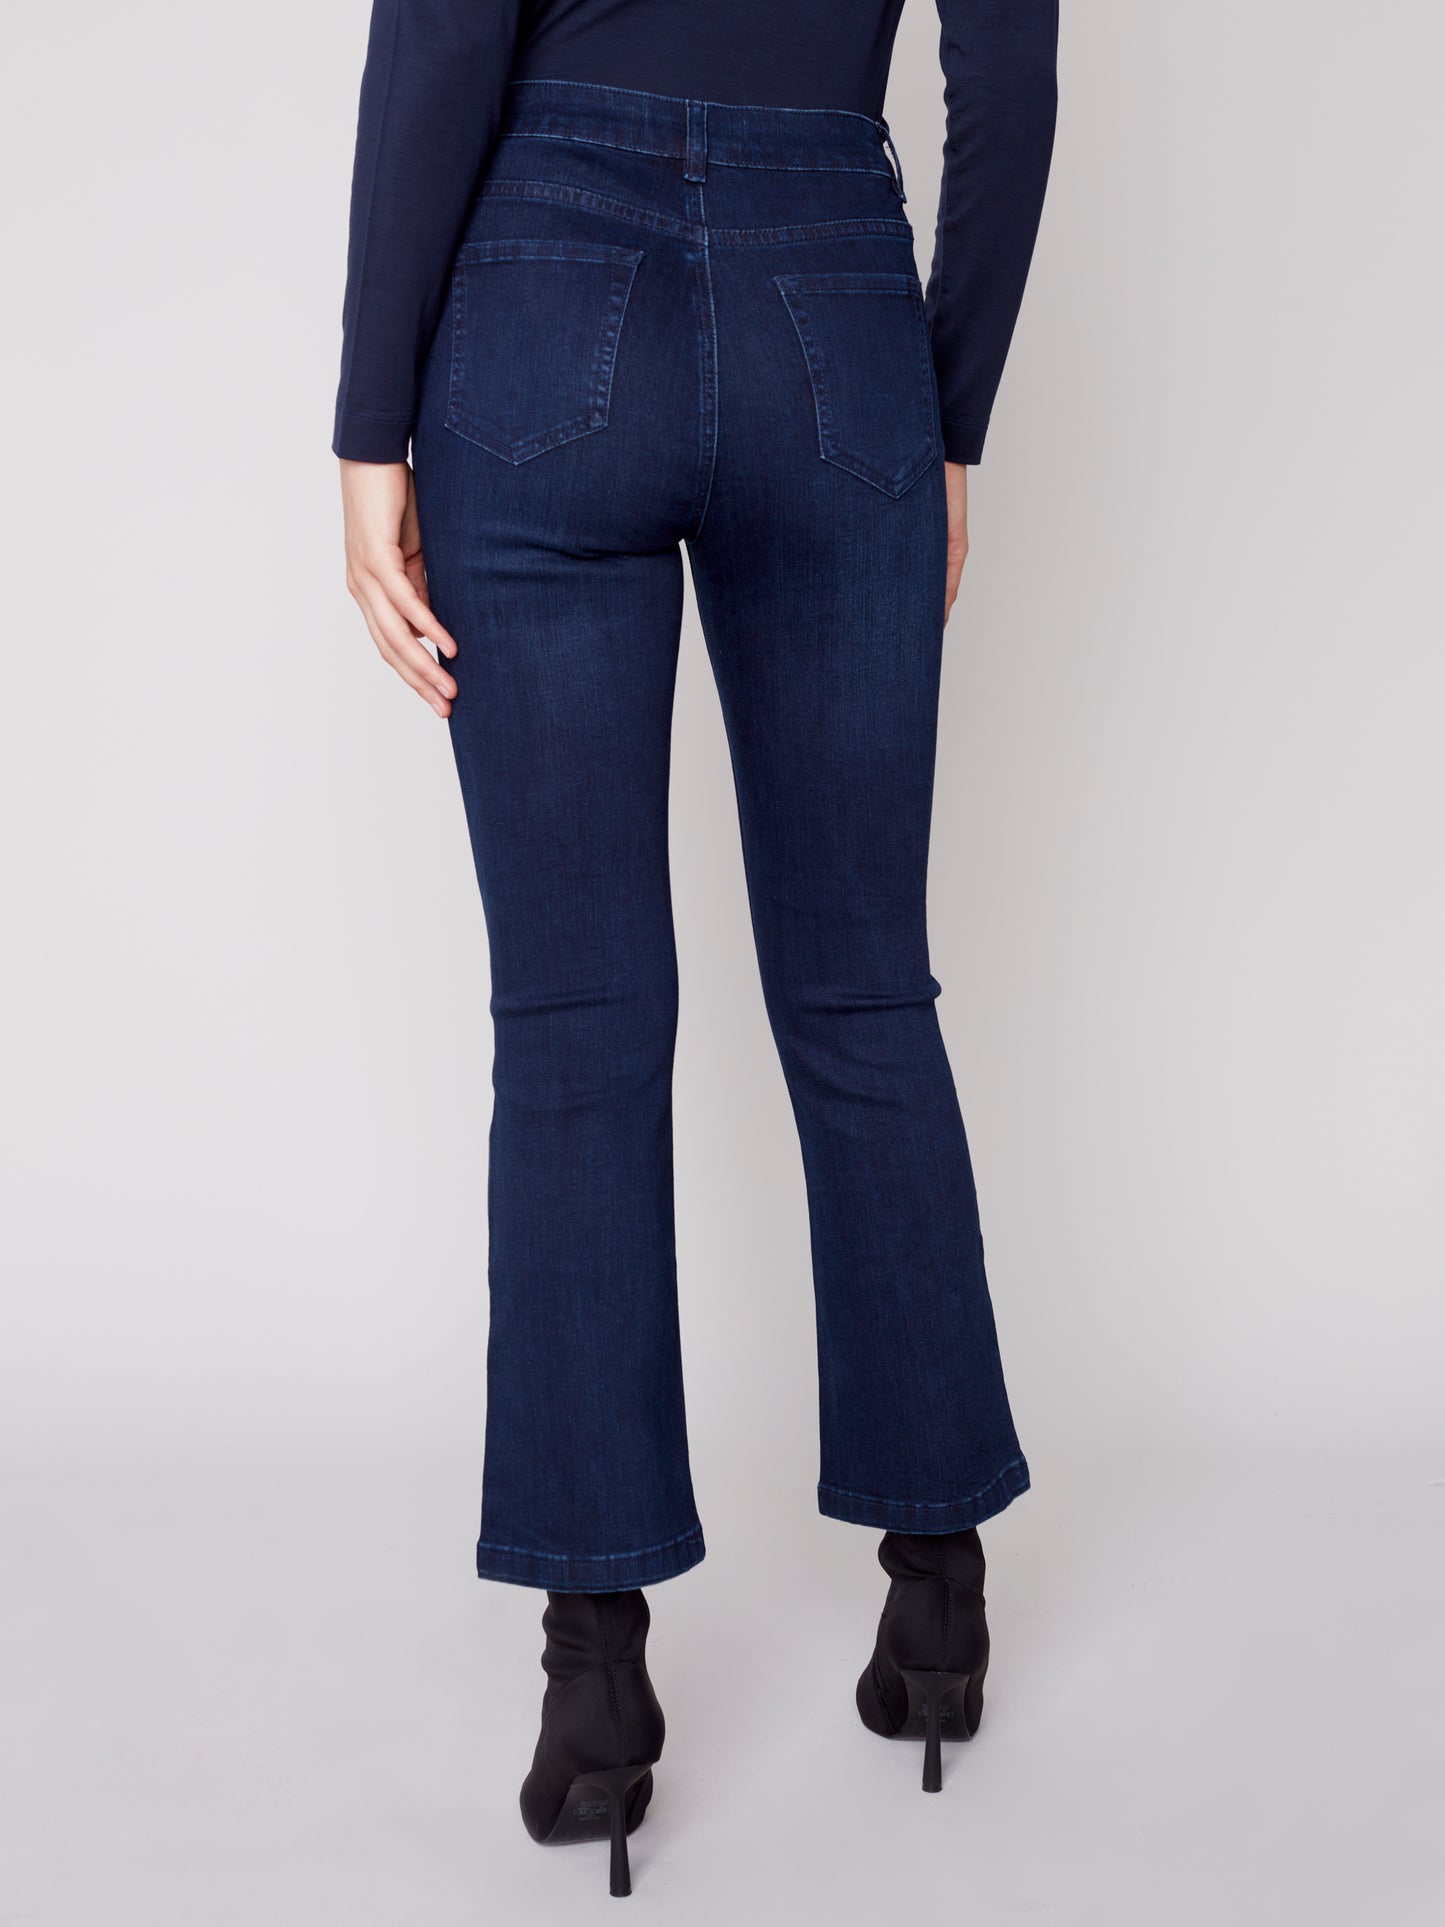 Charlie B Charlie B - Bootcut Leg Jean - Blue Black available at The Good Life Boutique